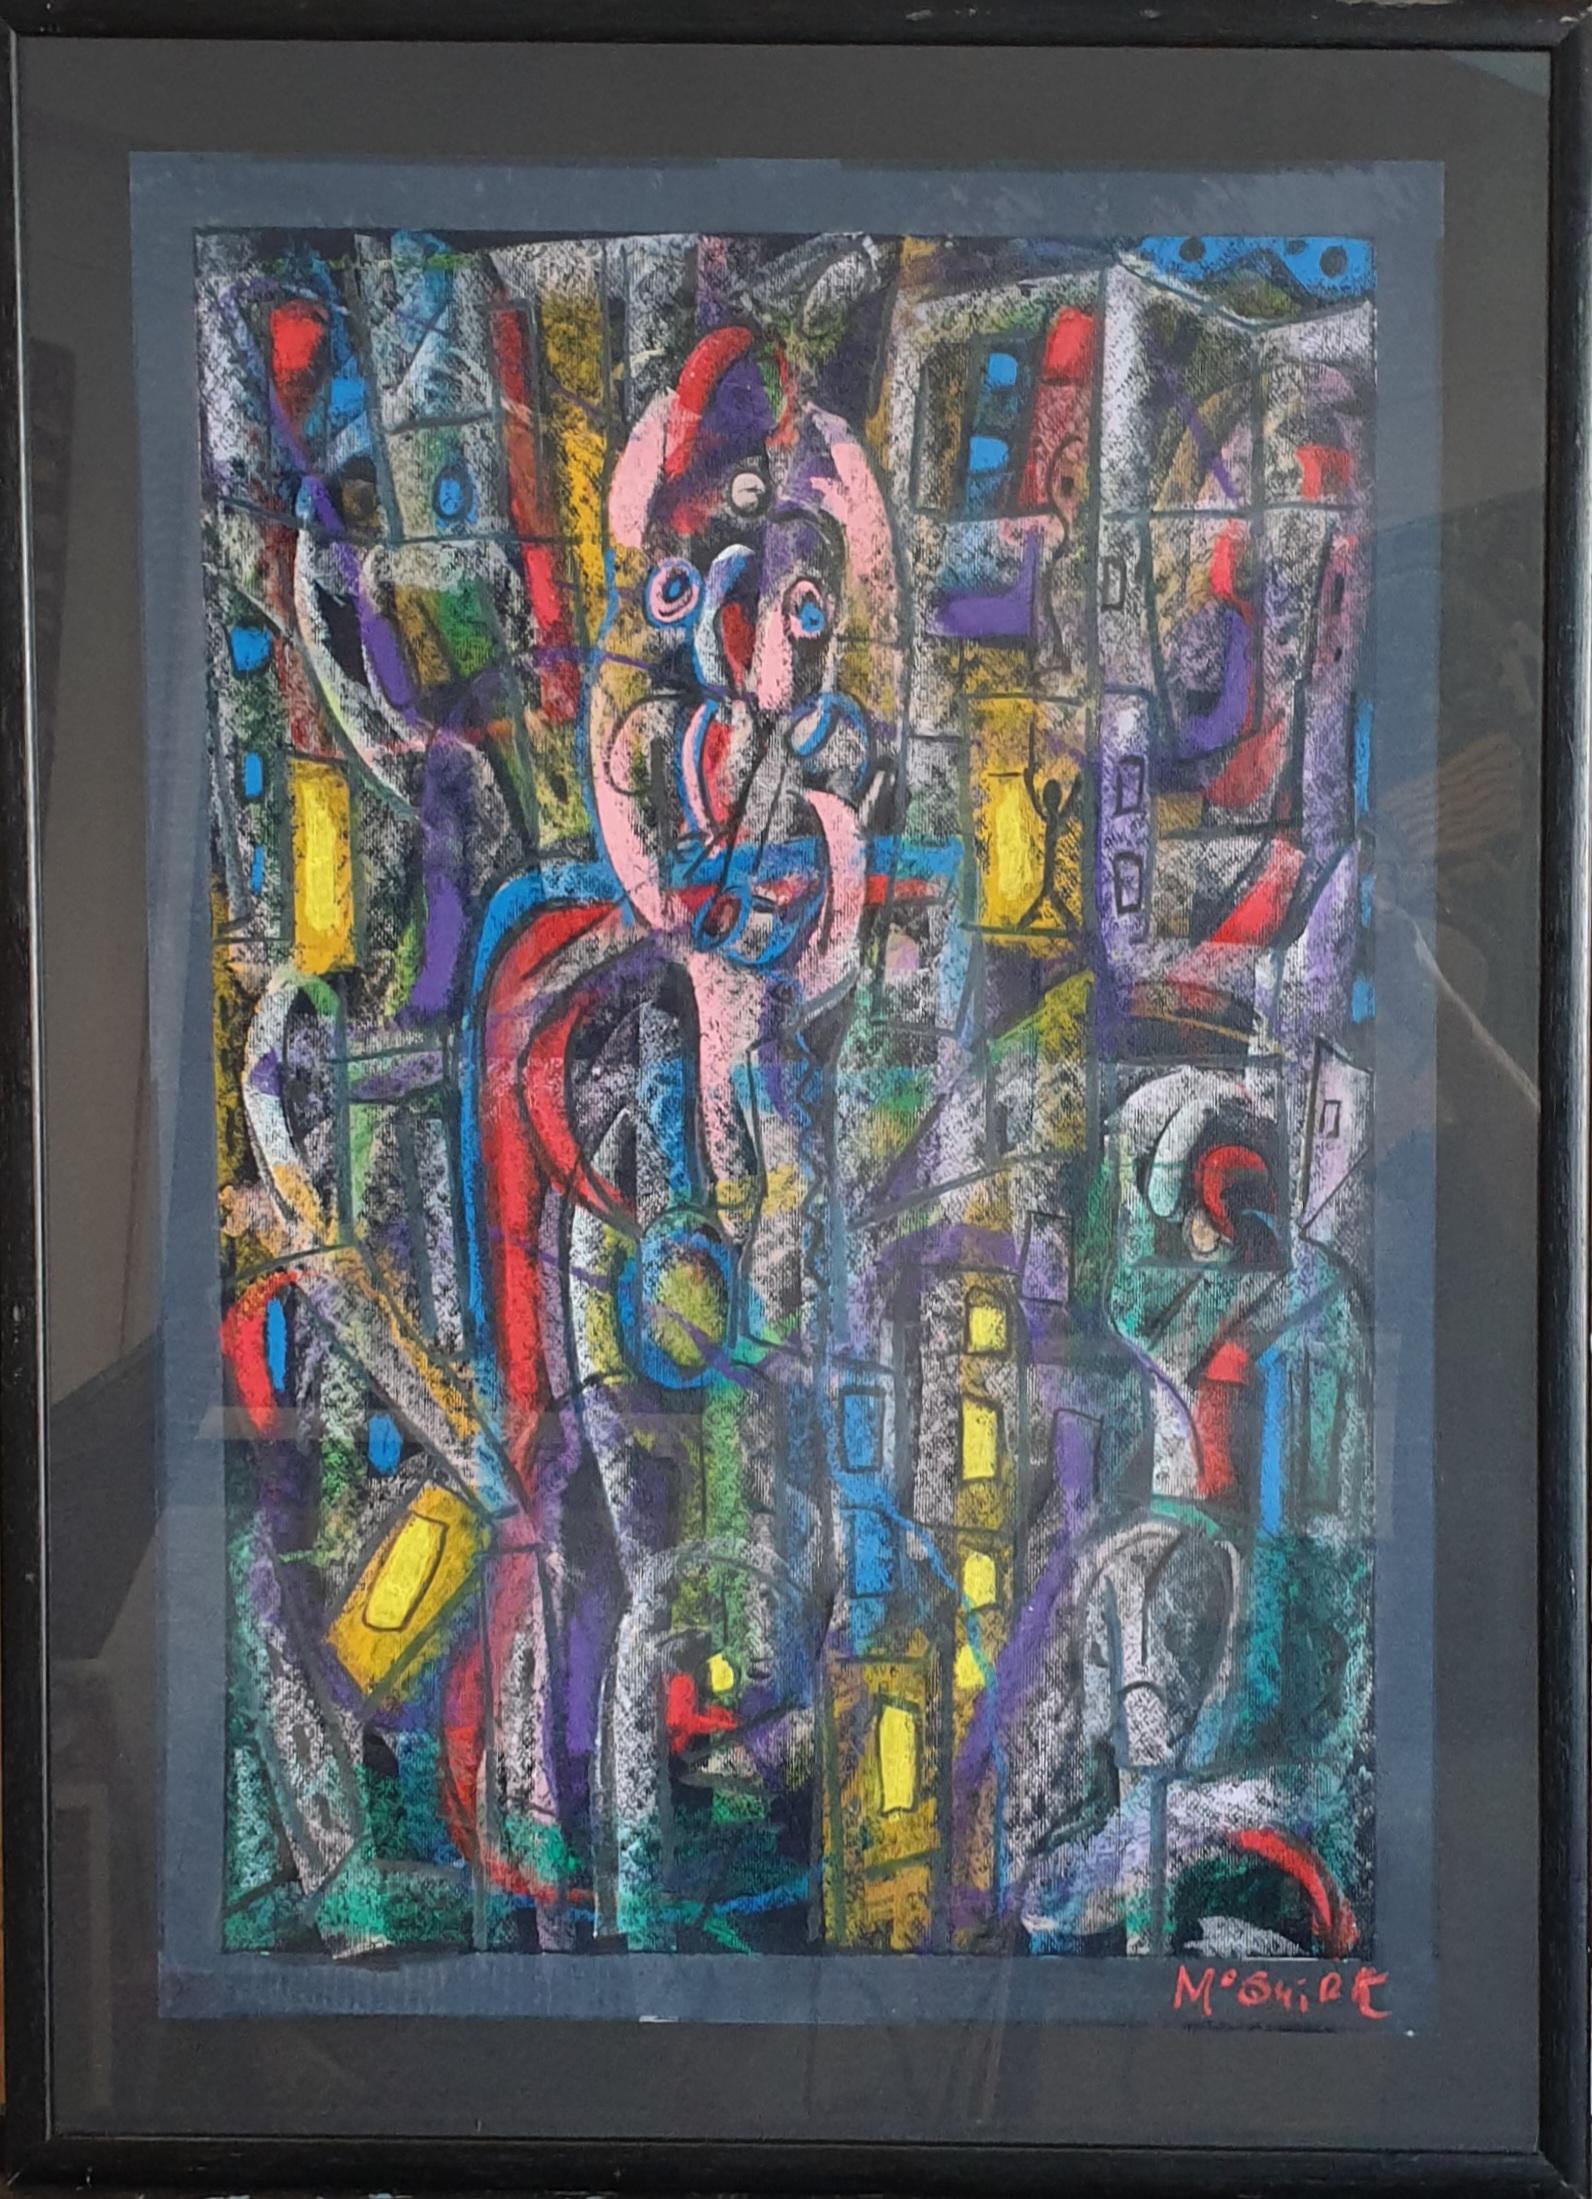 John Mc Quirk Abstract Drawing - Untitled, Abstract Expressionist Outsider Art, Pastel on Black Paper.